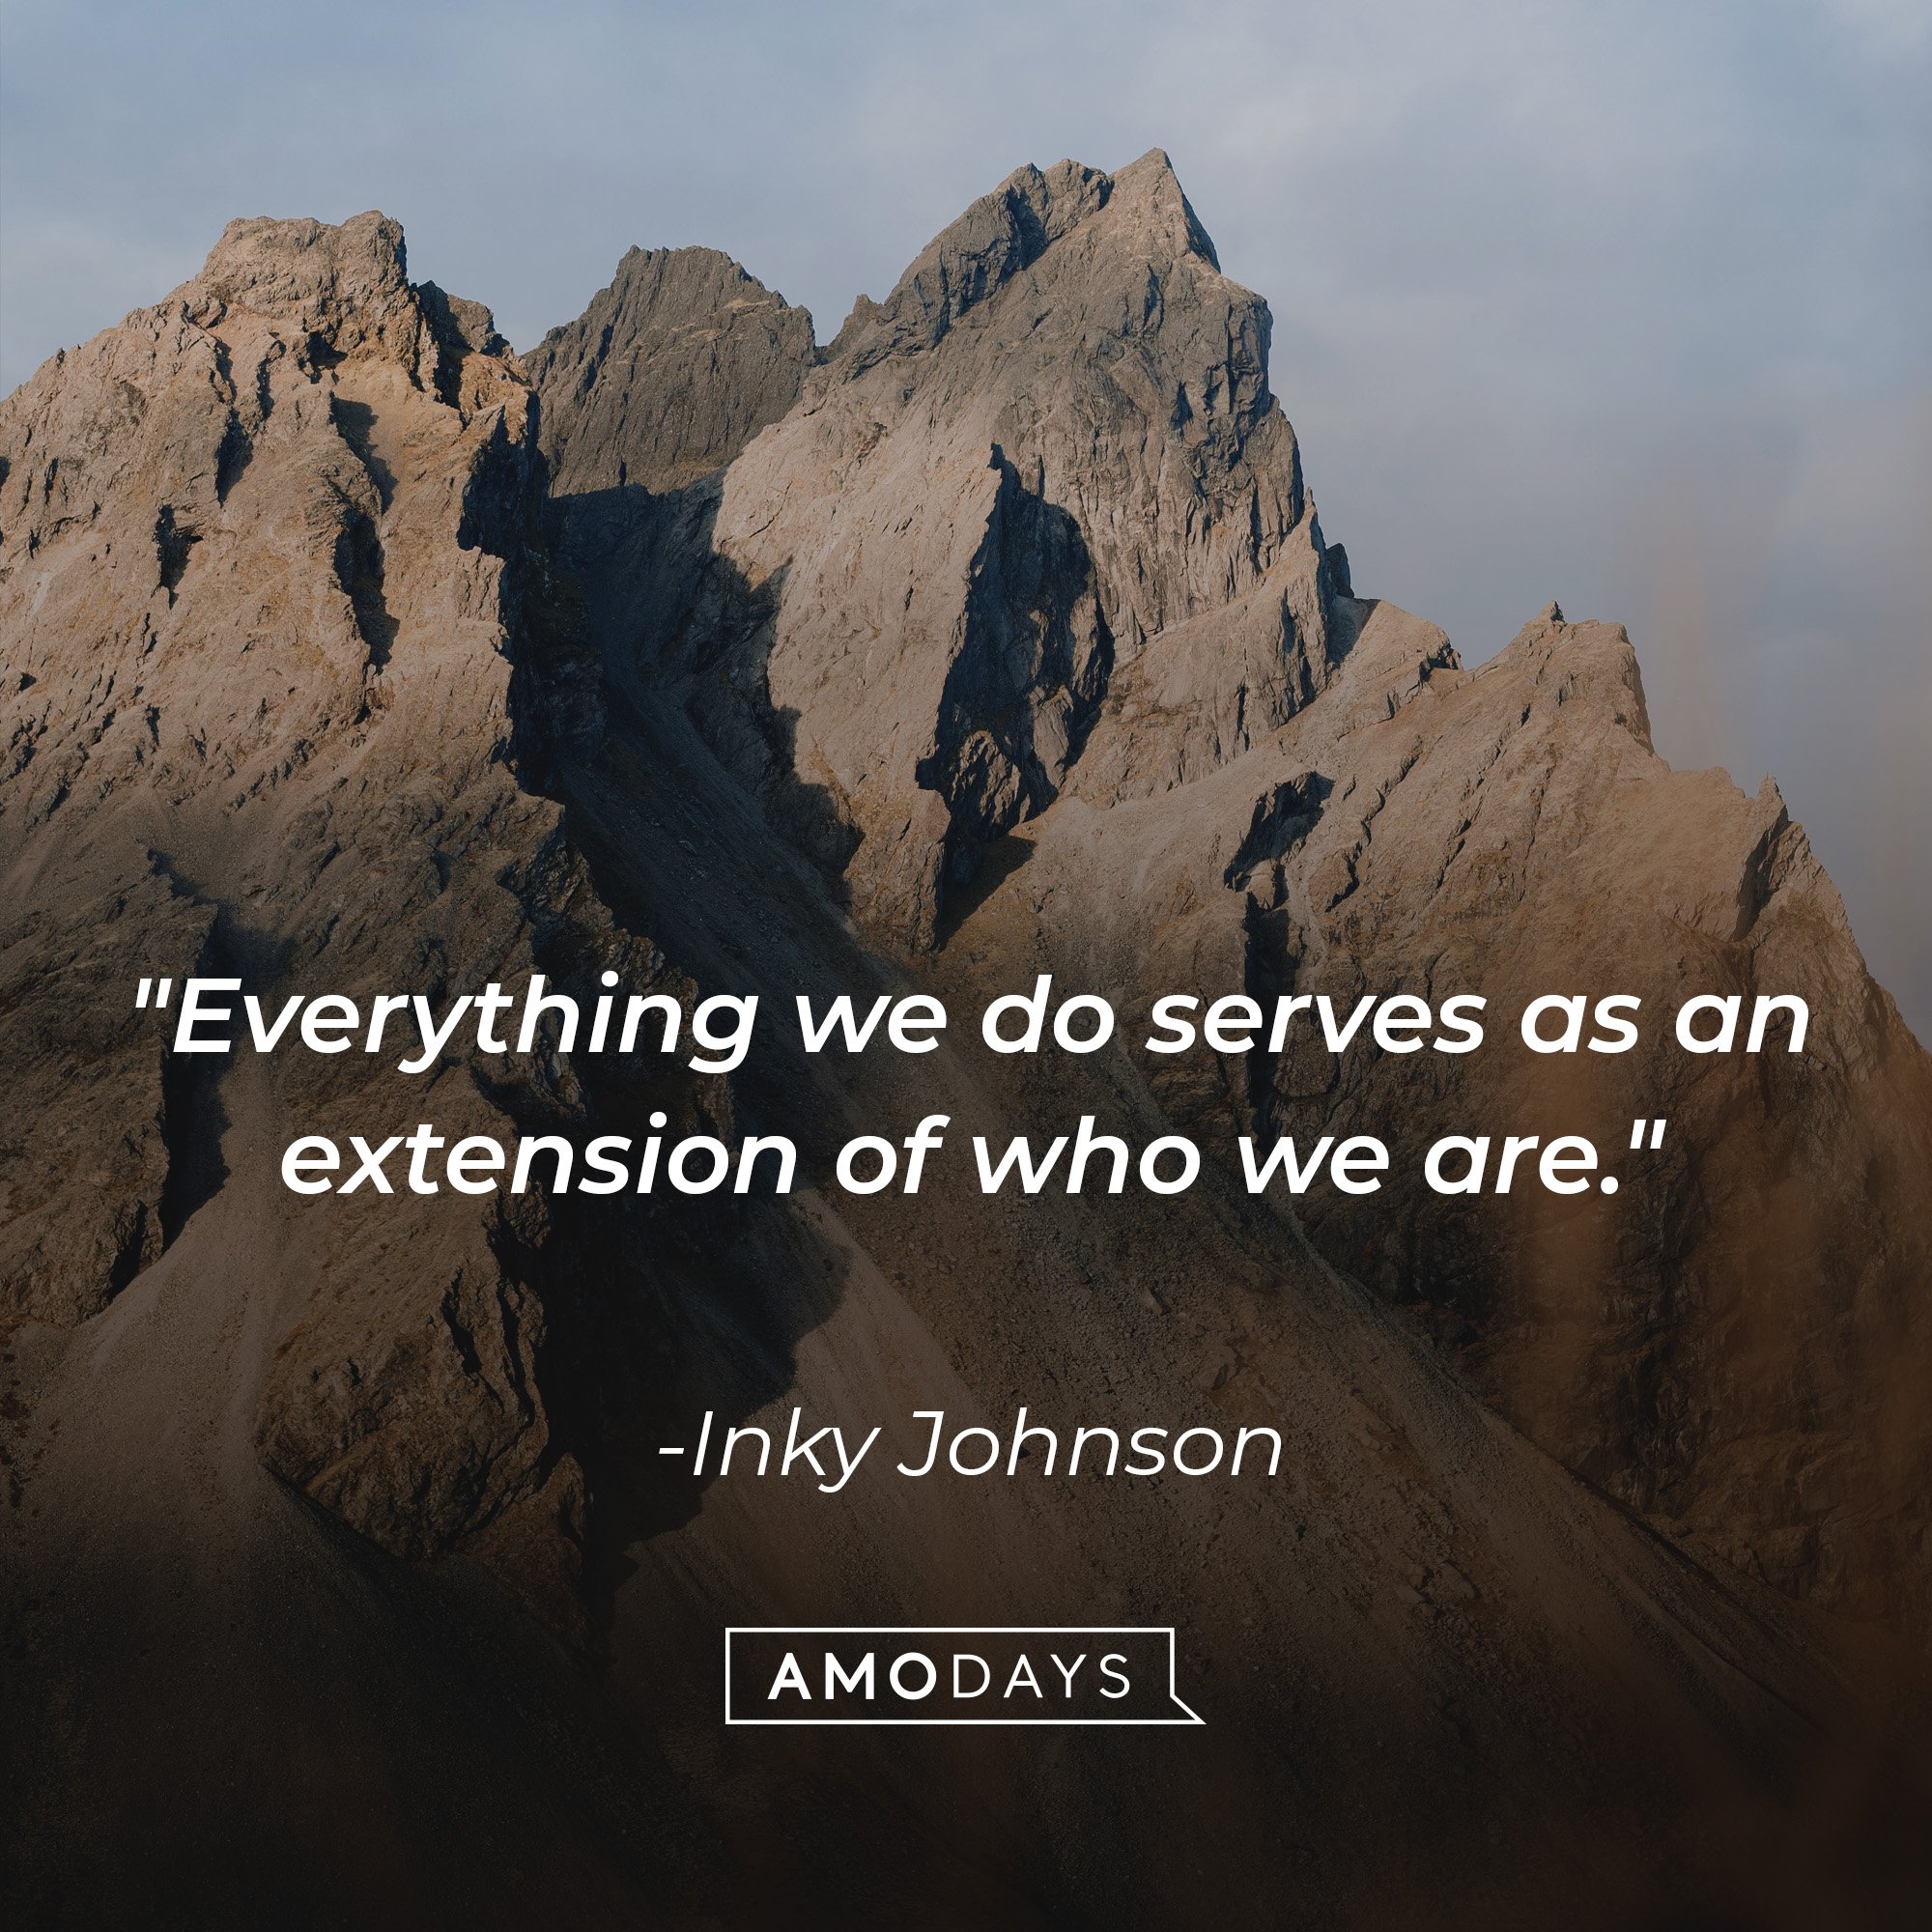 Inky Johnson's quote: "Everything we do serves as an extension of who we are." | Image: AmoDays